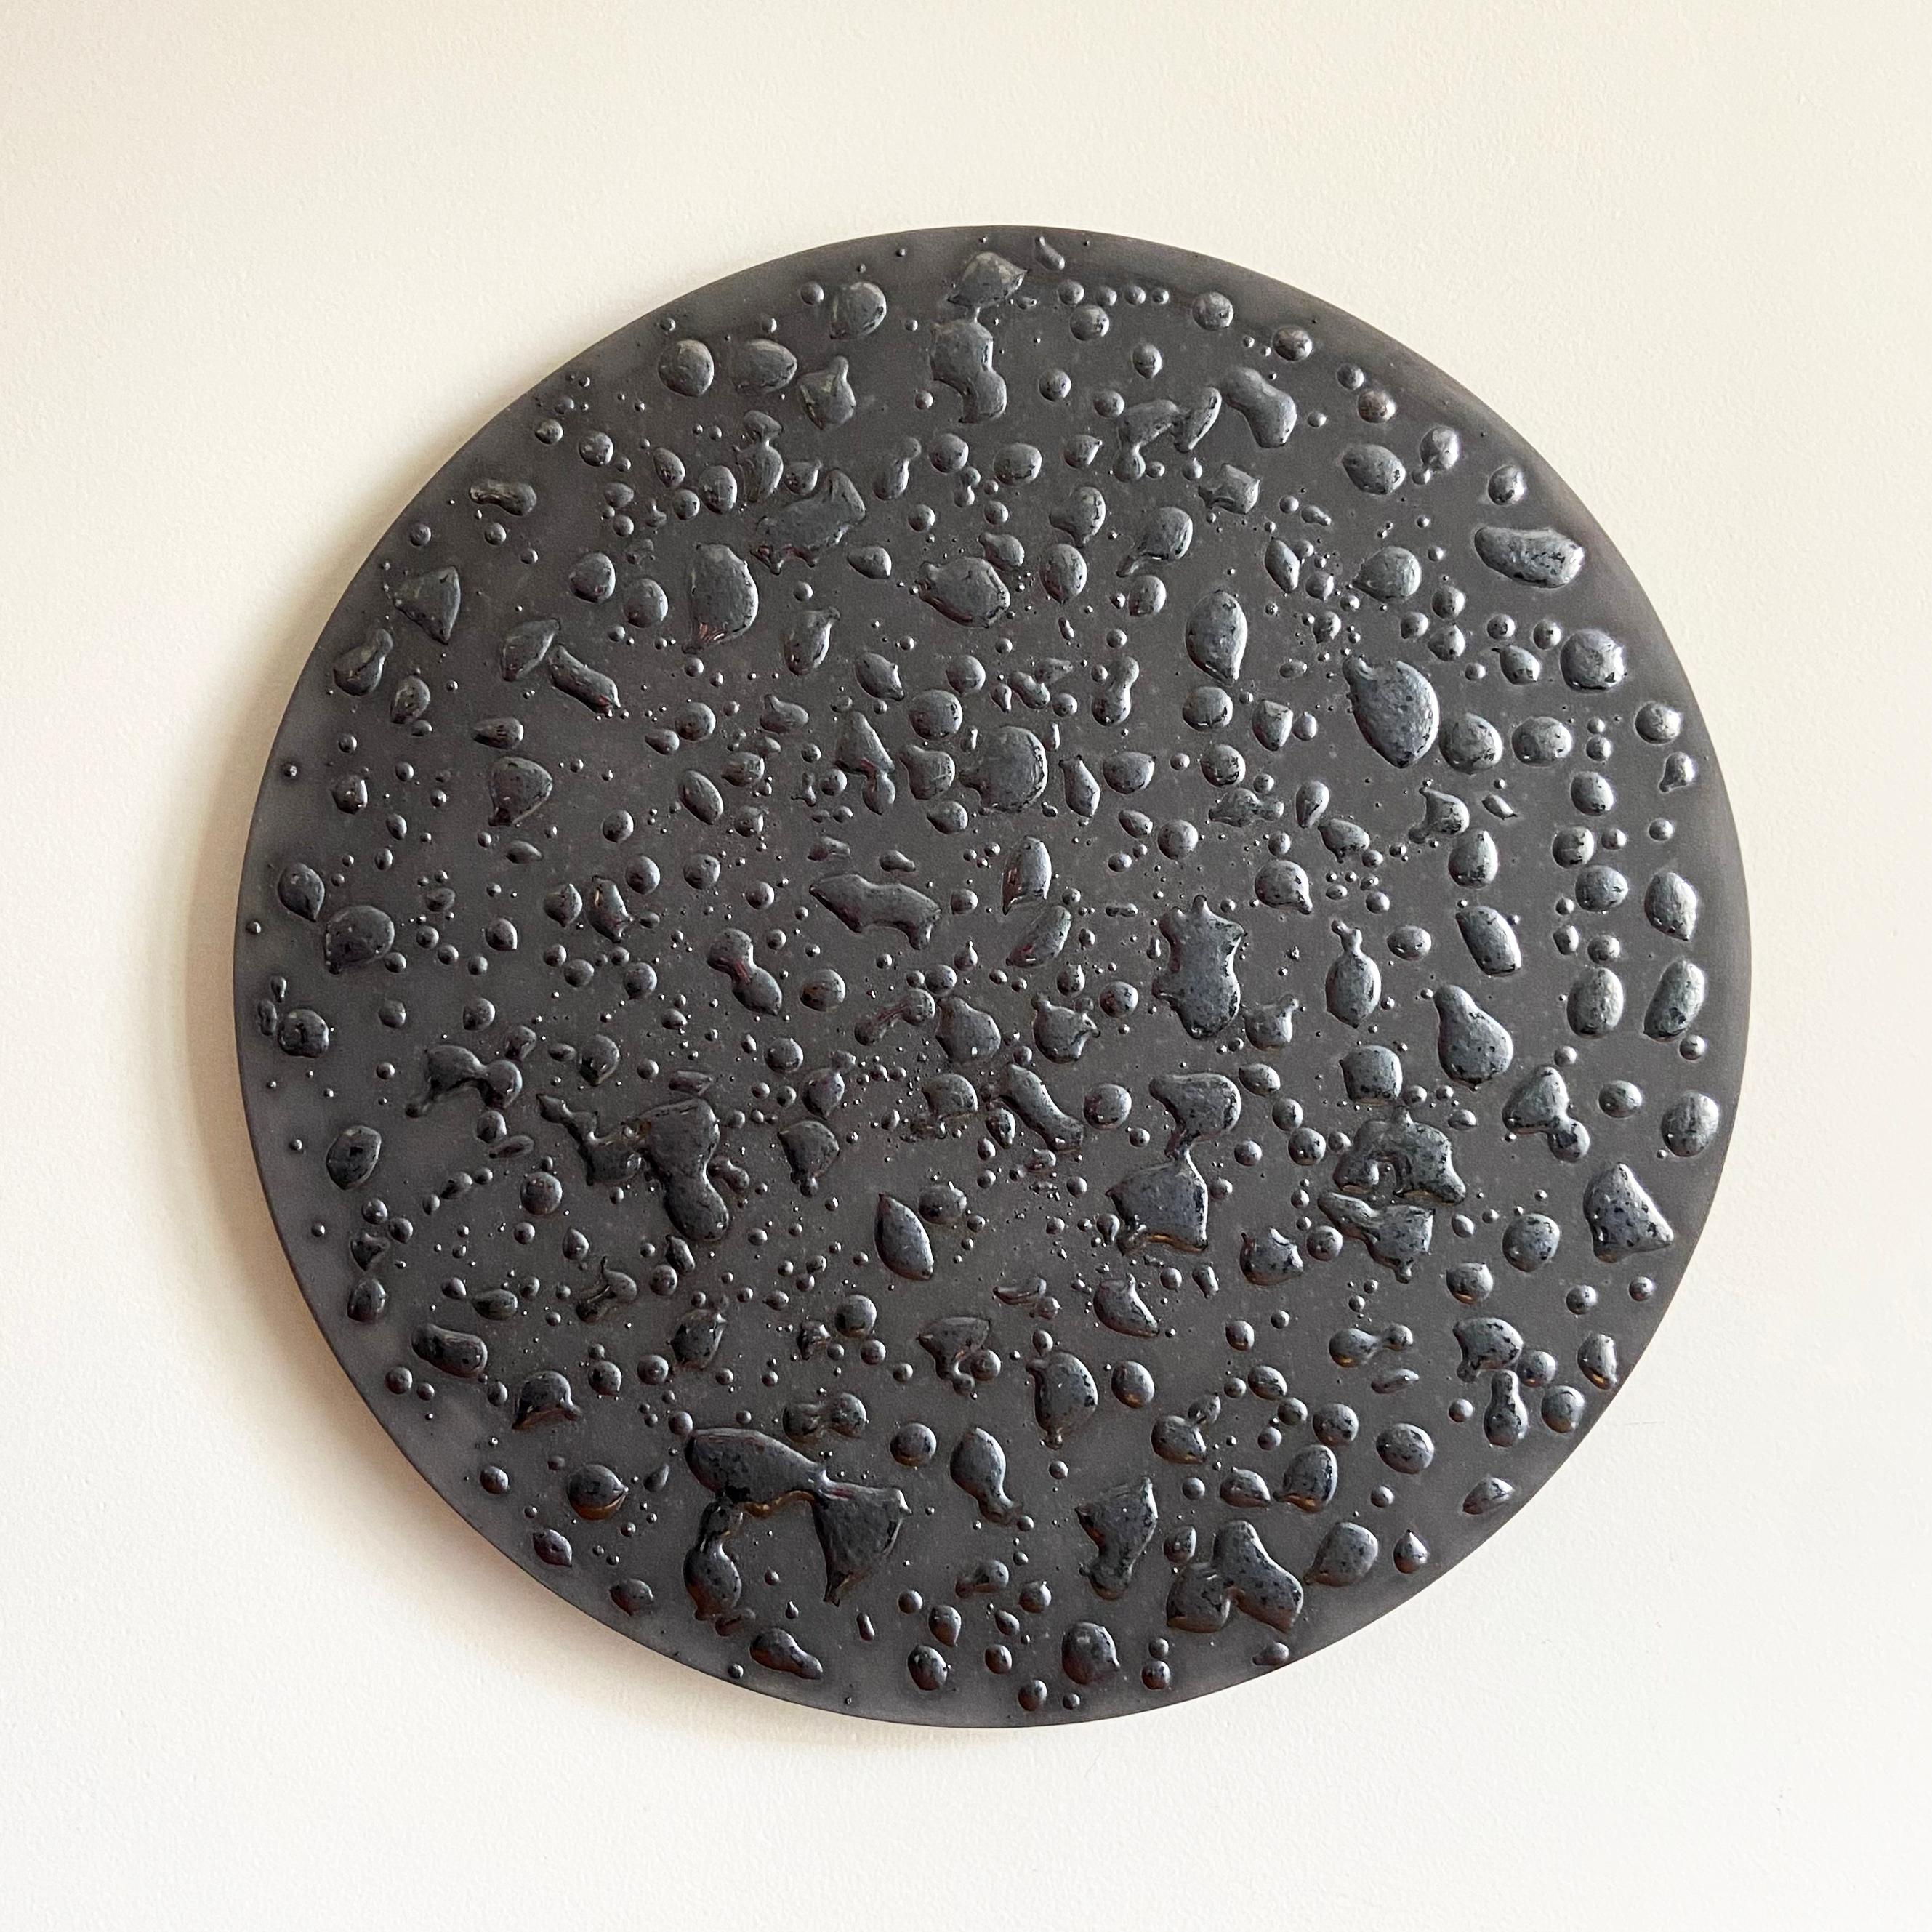 This is a “Clay Painting”, created by Olivia Barry / By Hand.

Black tinted clay with raised, dimensional metallic glaze. Photos show the reflection of bright and muted light.

Using large hand-rolled ceramic canvases, Olivia uses tinted clay